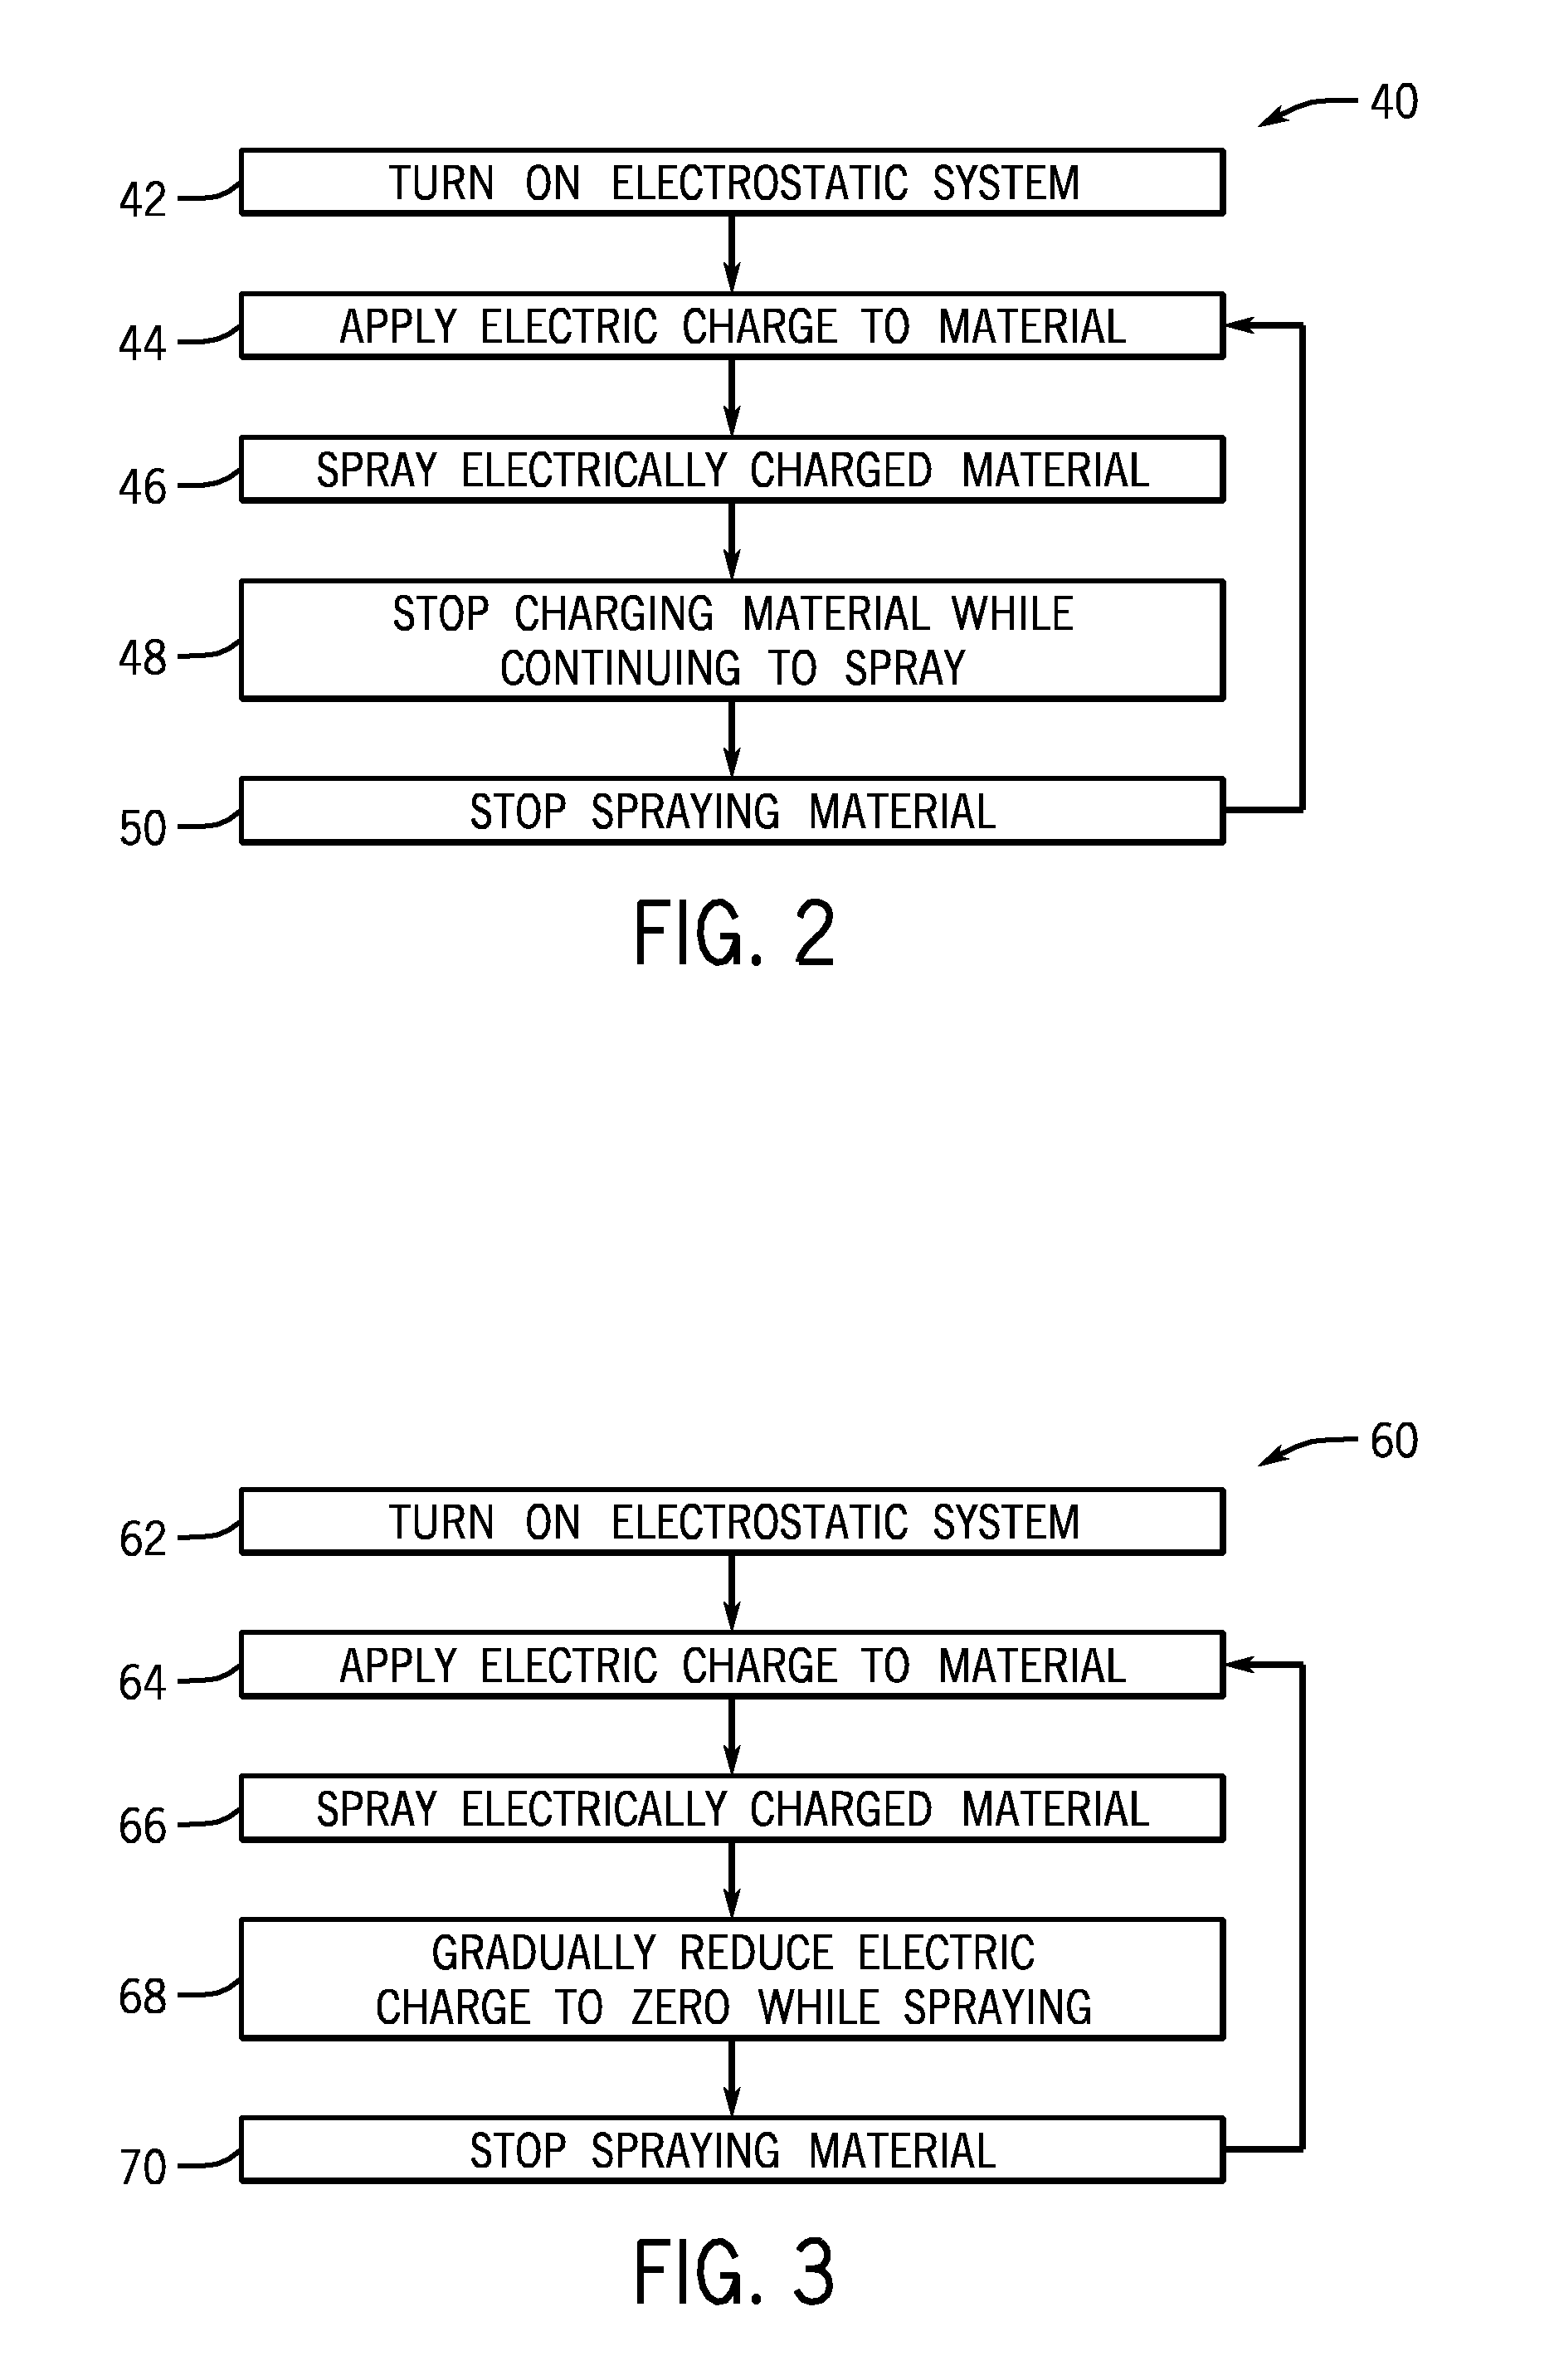 System and Method for Using an Electrostatic Tool